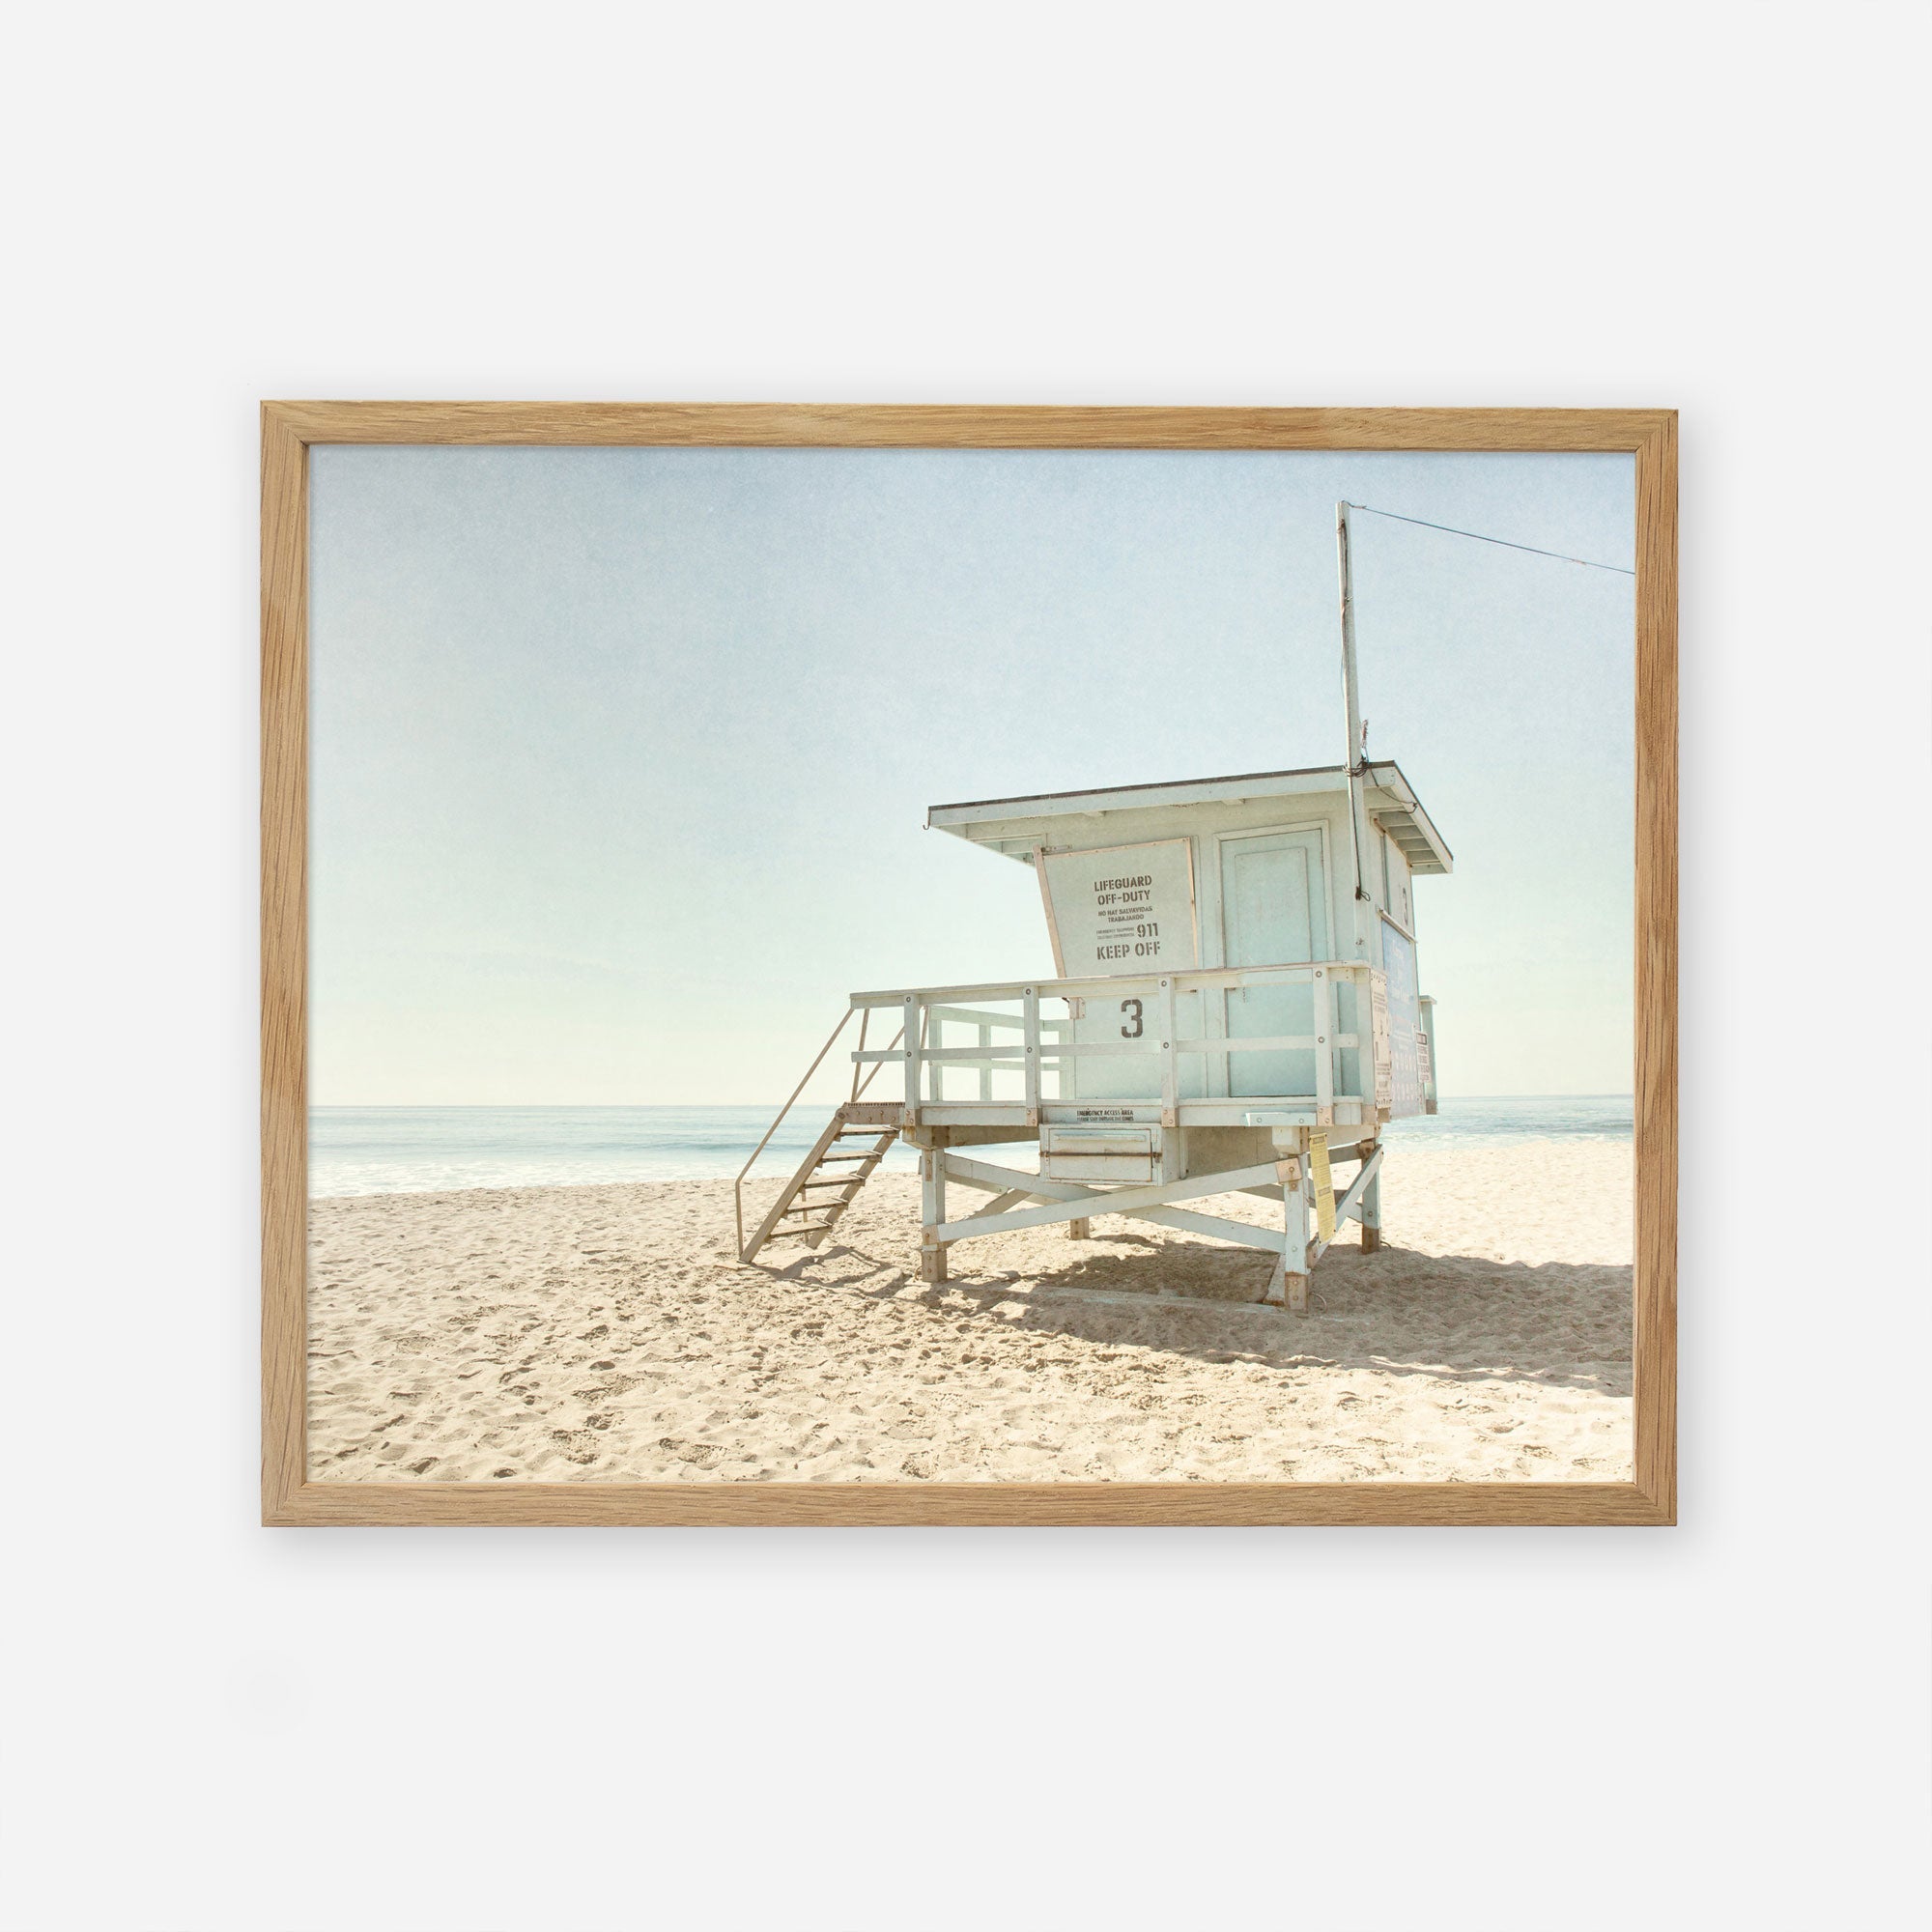 An unframed image of a lifeguard tower on a sandy beach under a clear sky, with the ocean in the background. The tower is painted white with details indicating it is tower number 3.
Product Name: Offley Green&#39;s California Summer Beach Art, &#39;Malibu Lifeguard Tower&#39;